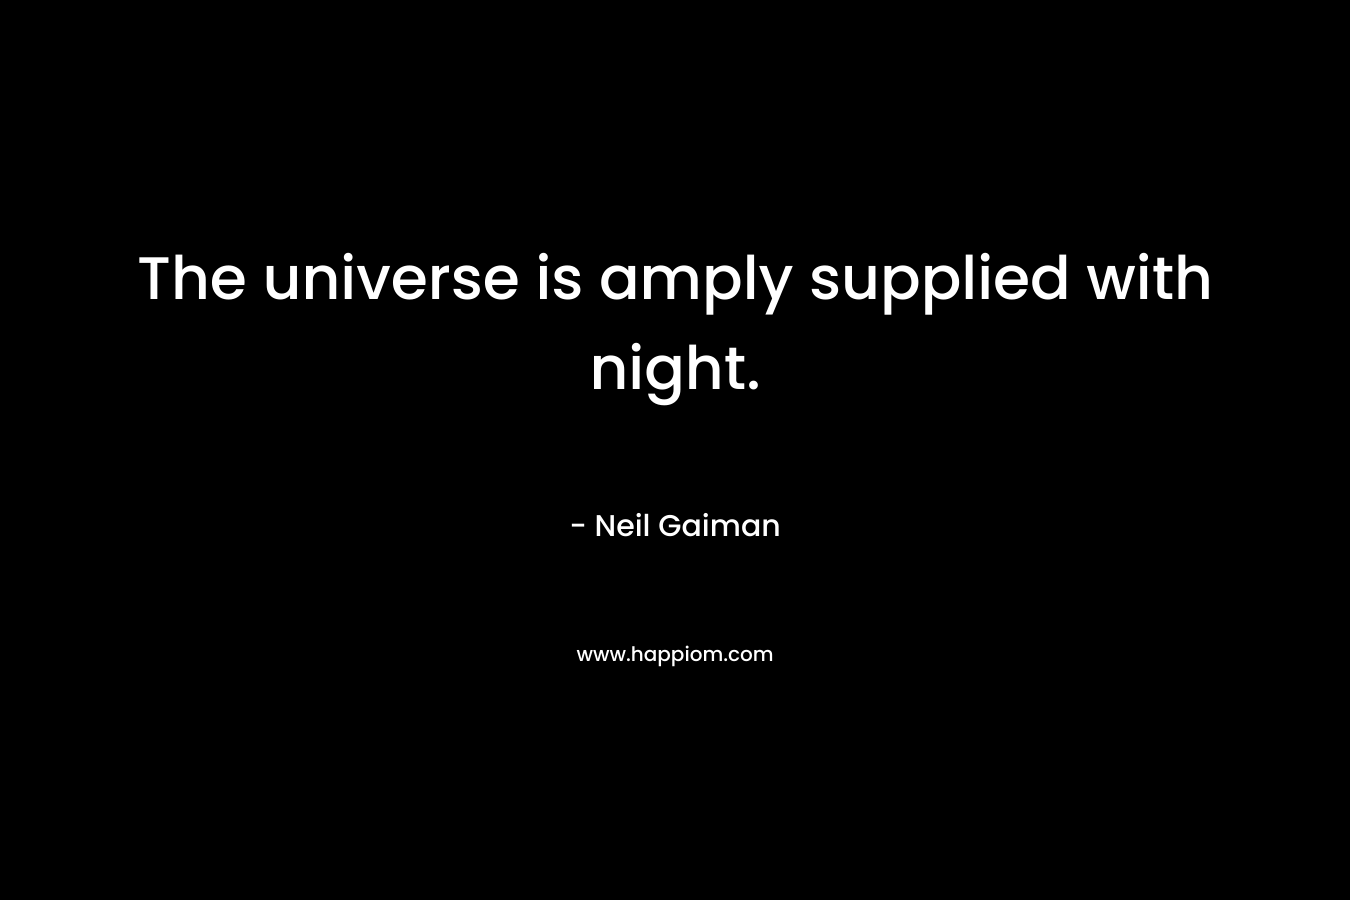 The universe is amply supplied with night. – Neil Gaiman